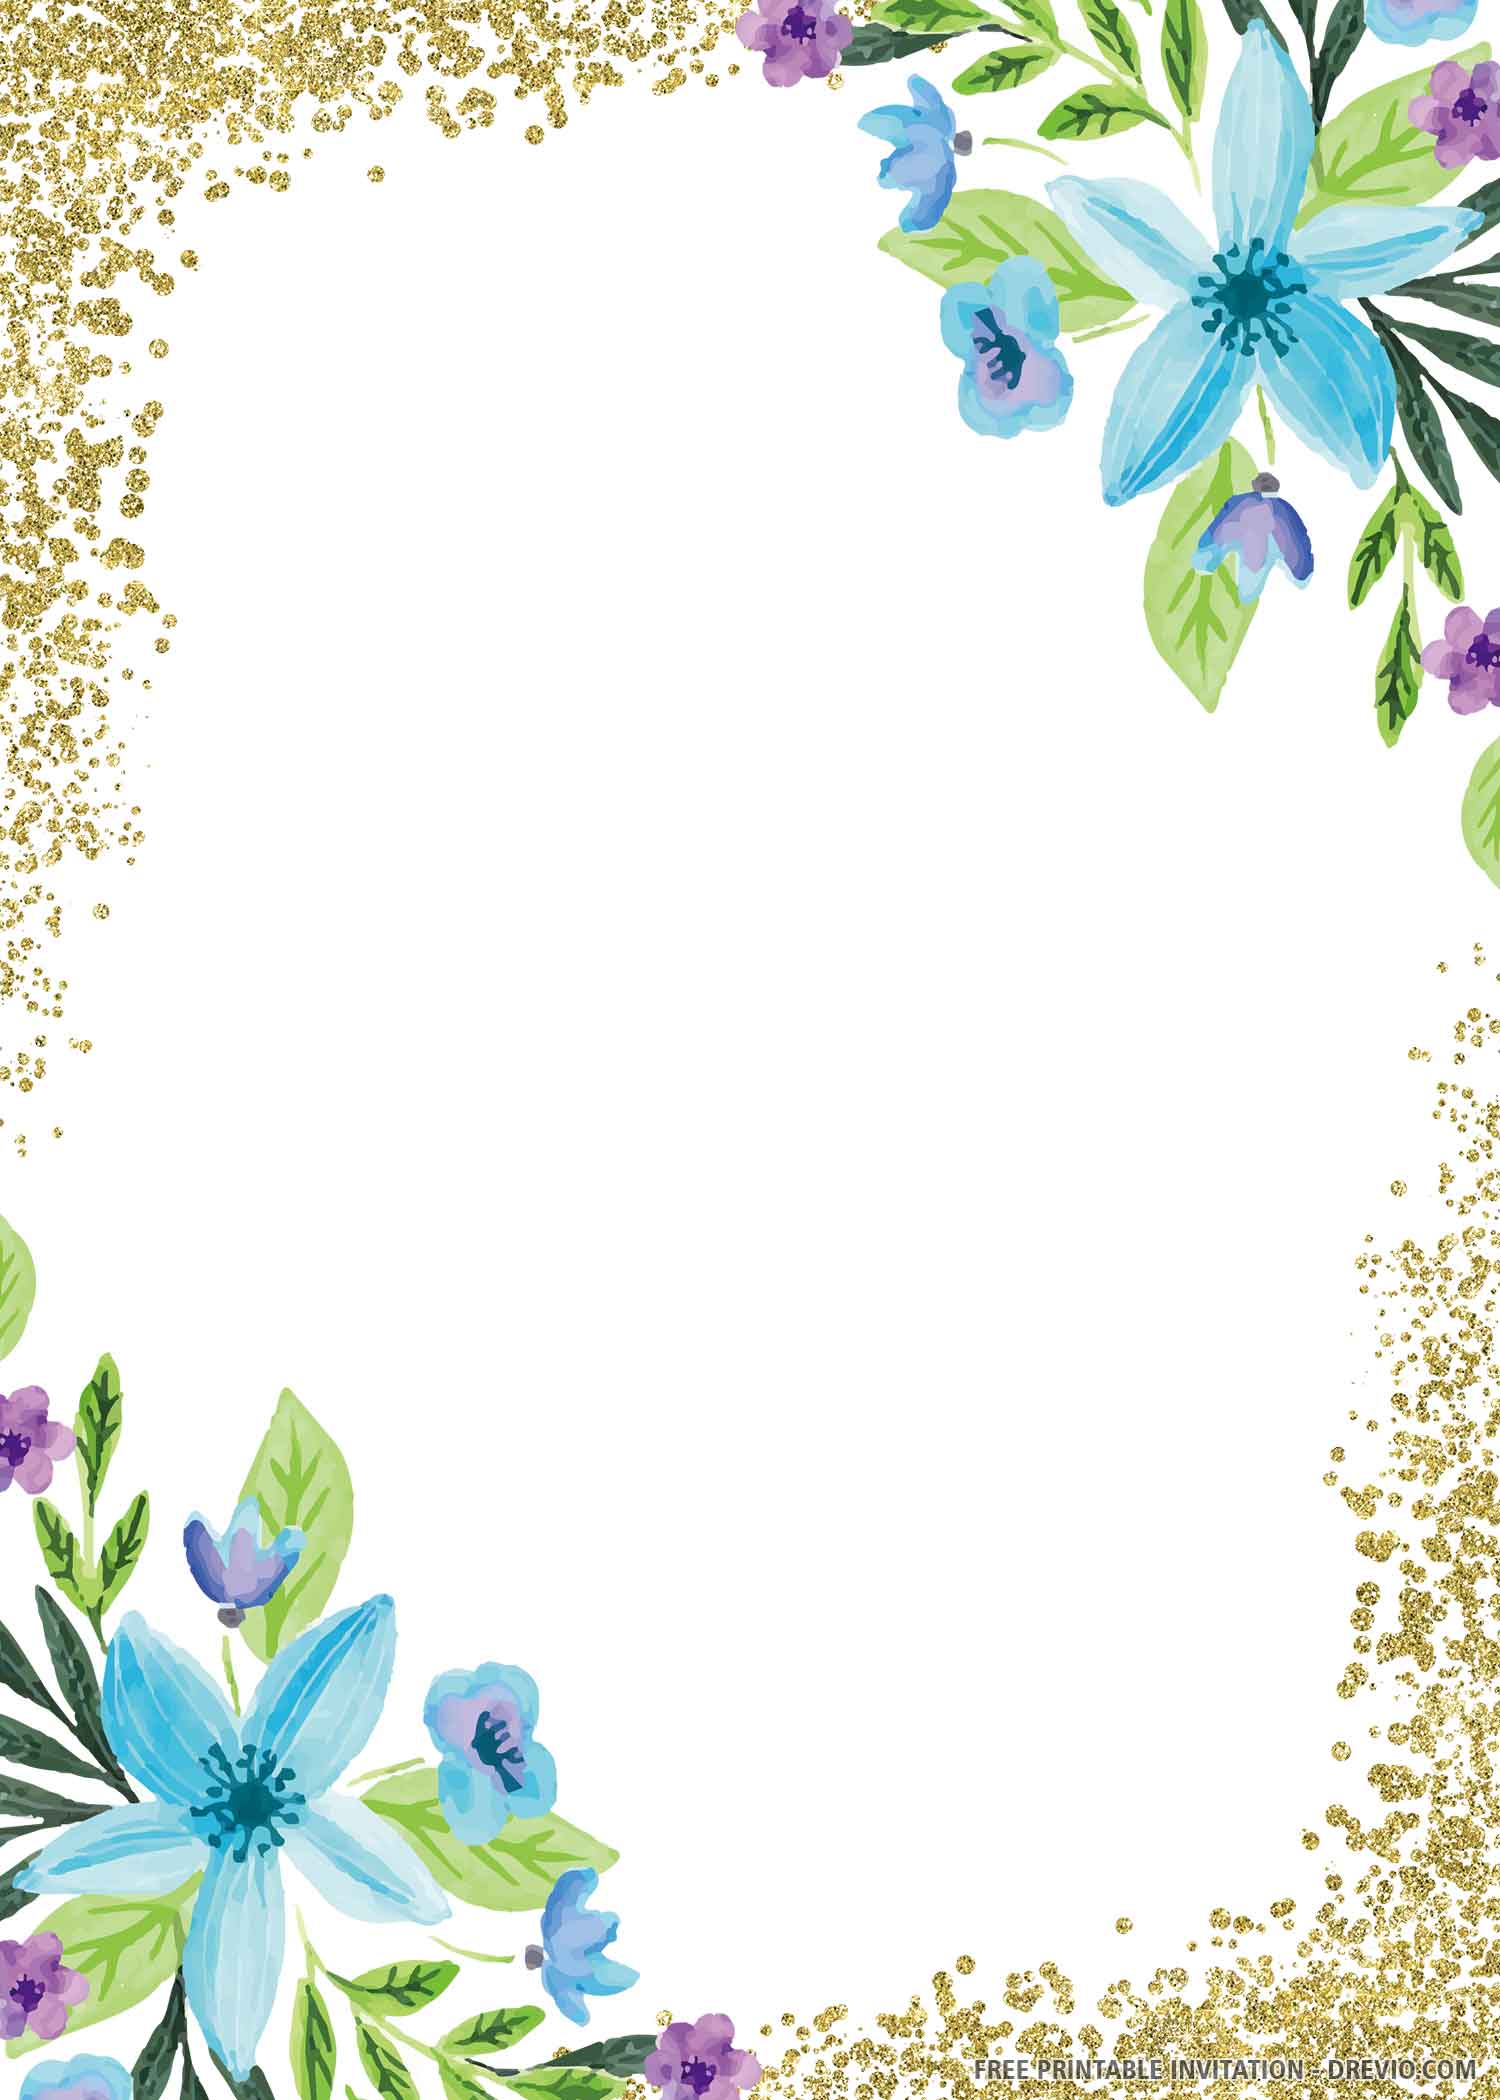 FREE PRINTABLE) – Blue Floral Wedding Invitation Template Within Blank Templates For Invitations